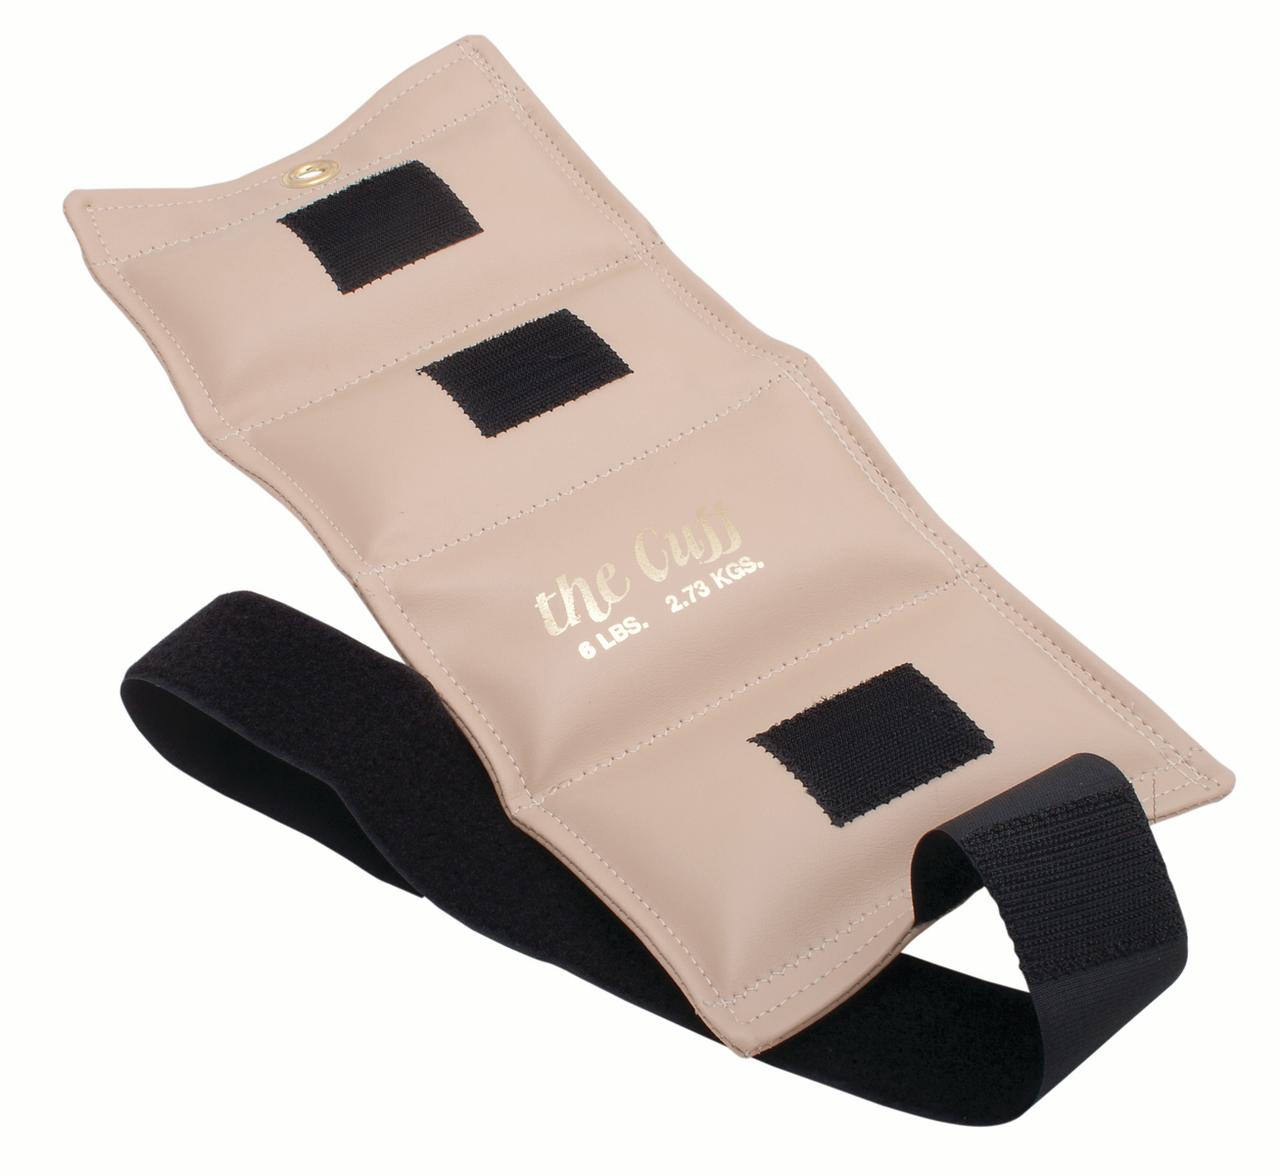 The Cuff Original Adjustable Ankle and Wrist Weight for Yoga, Dance, Running, Cardio, Aerobics, Toning, and Physical Therapy. 6 lb - Beige - image 1 of 5